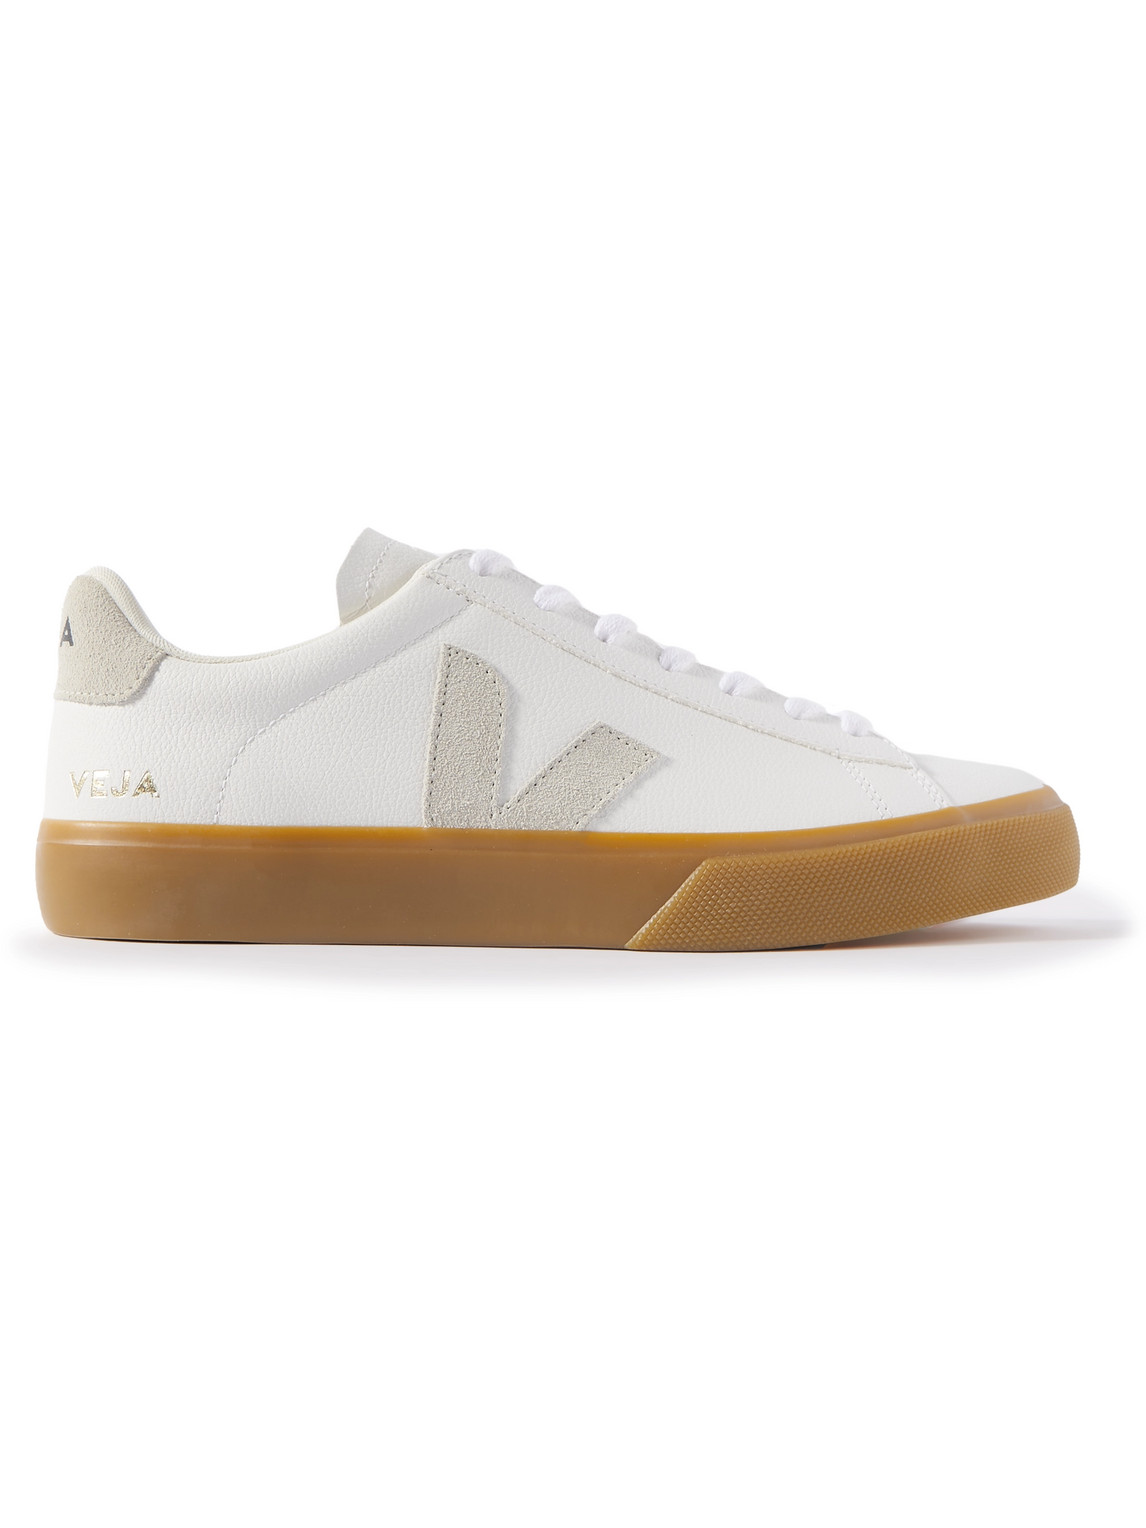 Veja Campo Suede-trimmed Leather Sneakers In Extra White & Natural